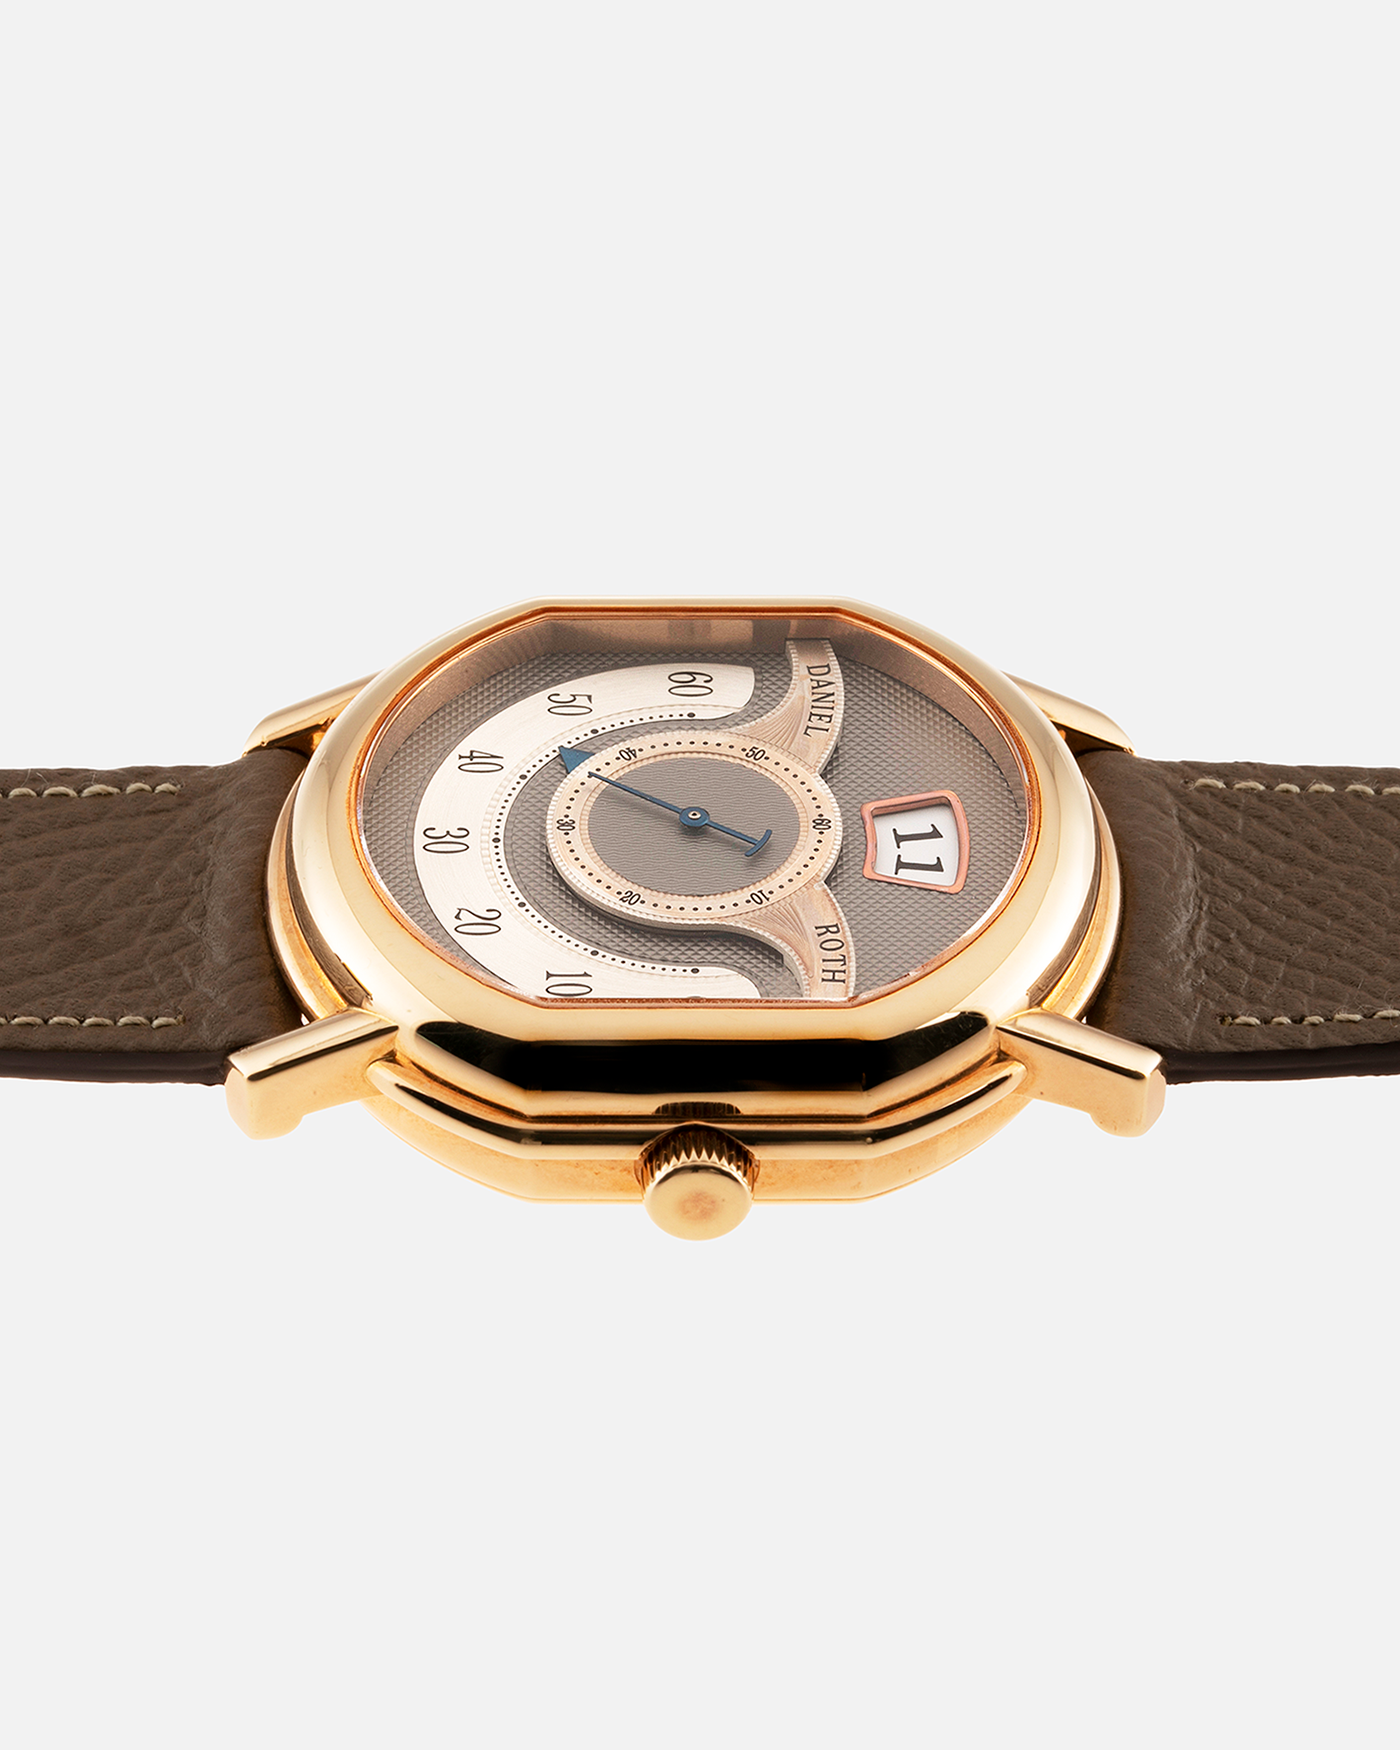 Brand: Daniel Roth Year: 1999 Model: 10th Anniversary Papillon Material: 18k Rose Gold Movement: Daniel Roth Calibre DR113 Case Diameter: 35mm X 41mm X 11mm Bracelet/Strap: Nostime Taupe Textured Calf Strap with 18k Rose Gold Tang Buckle